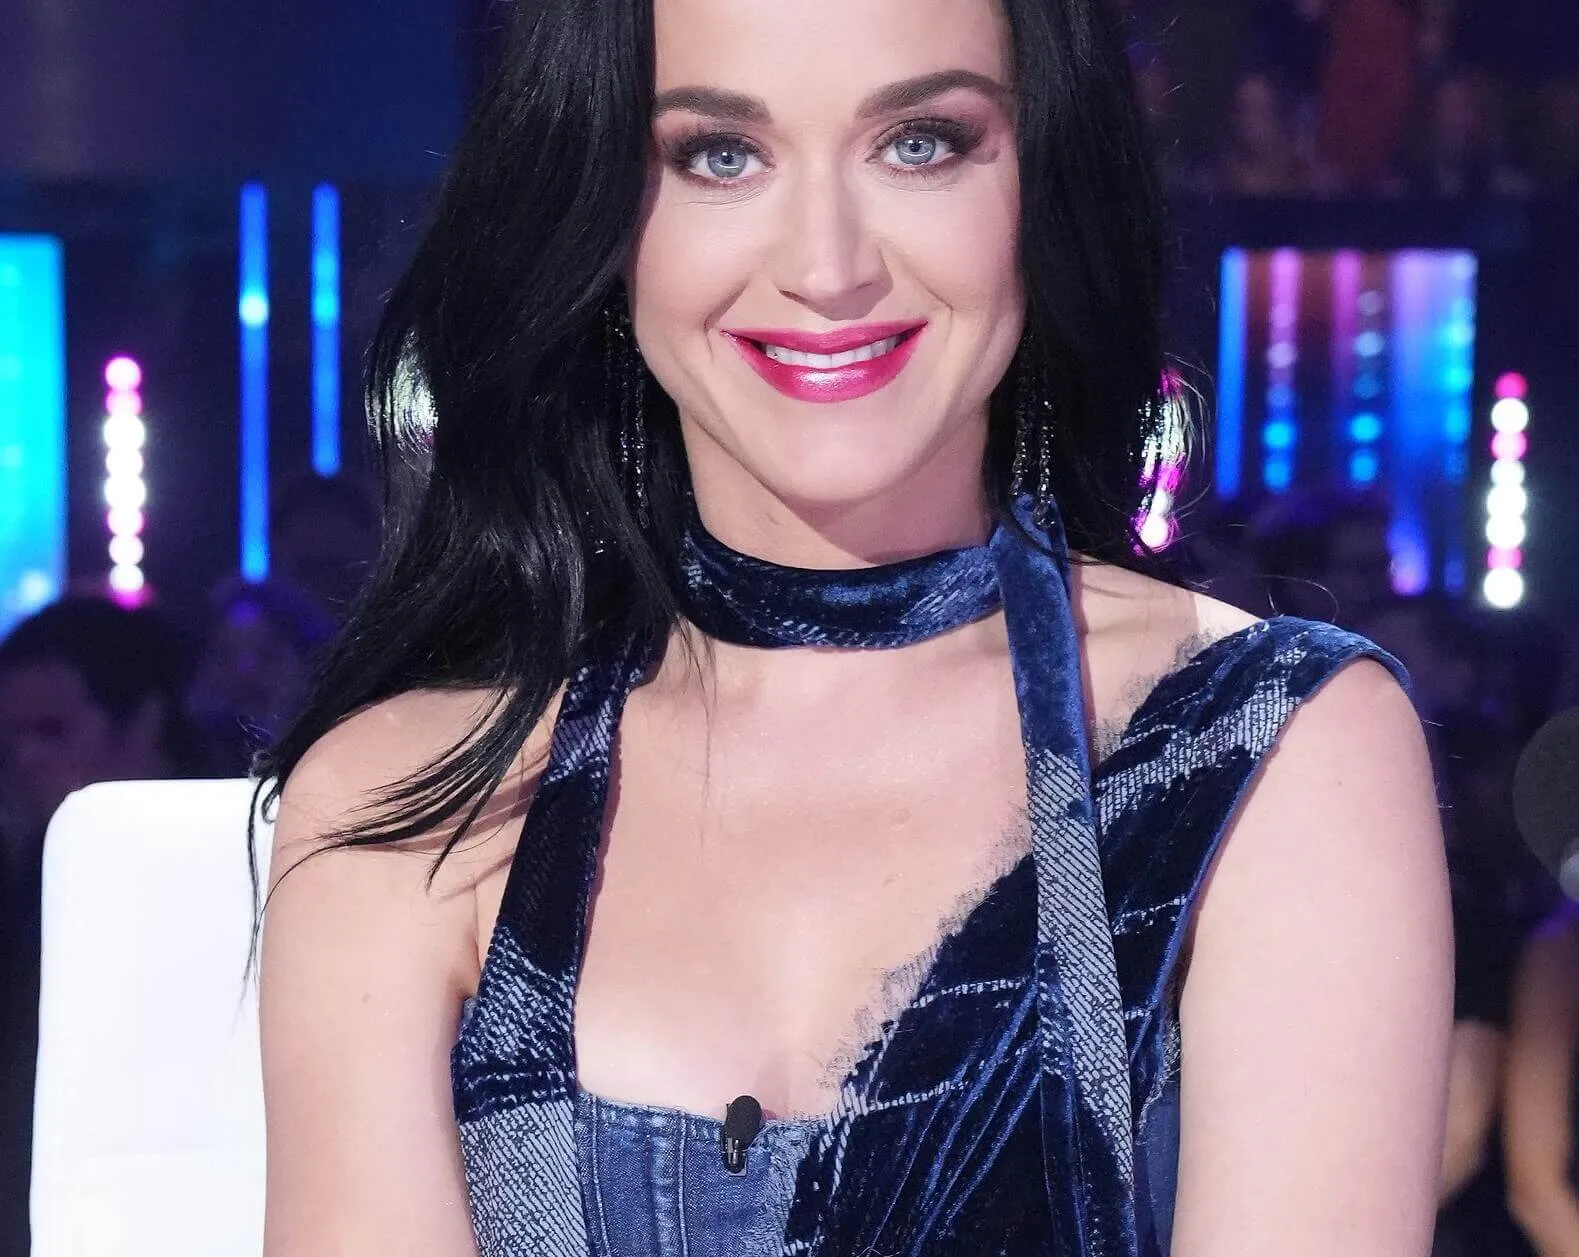 "Woman's World" singer Katy Perry smiling